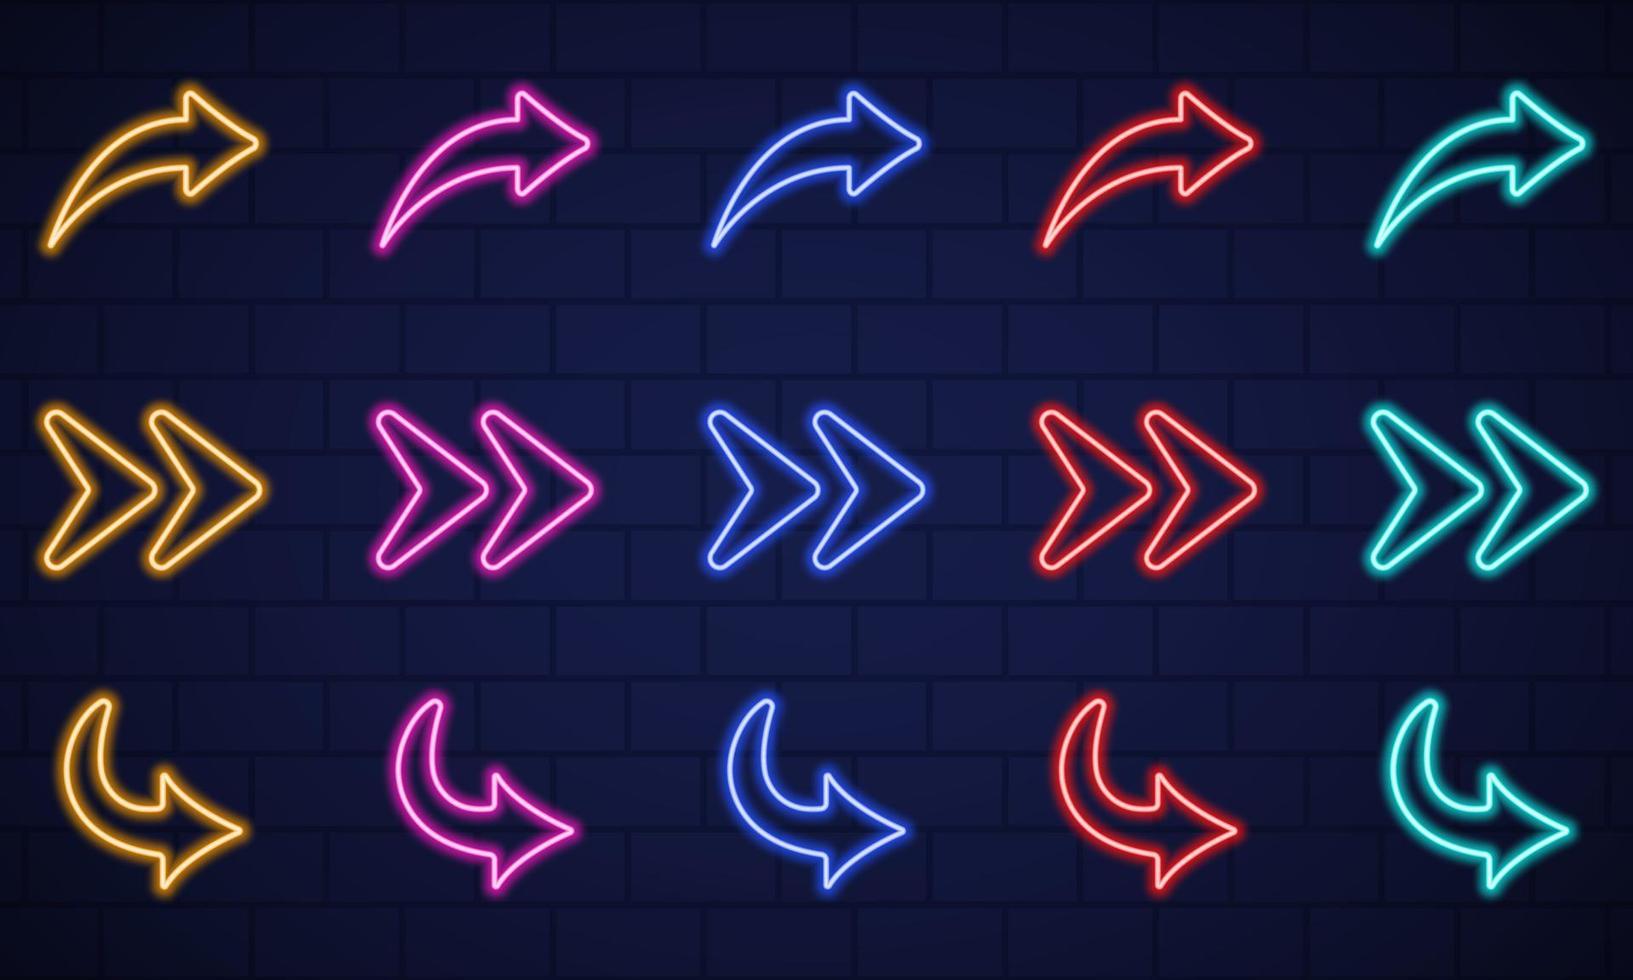 Colorful Neon Right Arrows Icons on Dark Wall Background. Location Indicator Casino, Bar, Night Club, Cinema and Motel. Glowing Neon Arrows of Different Colors. Isolated Vector Illustration.